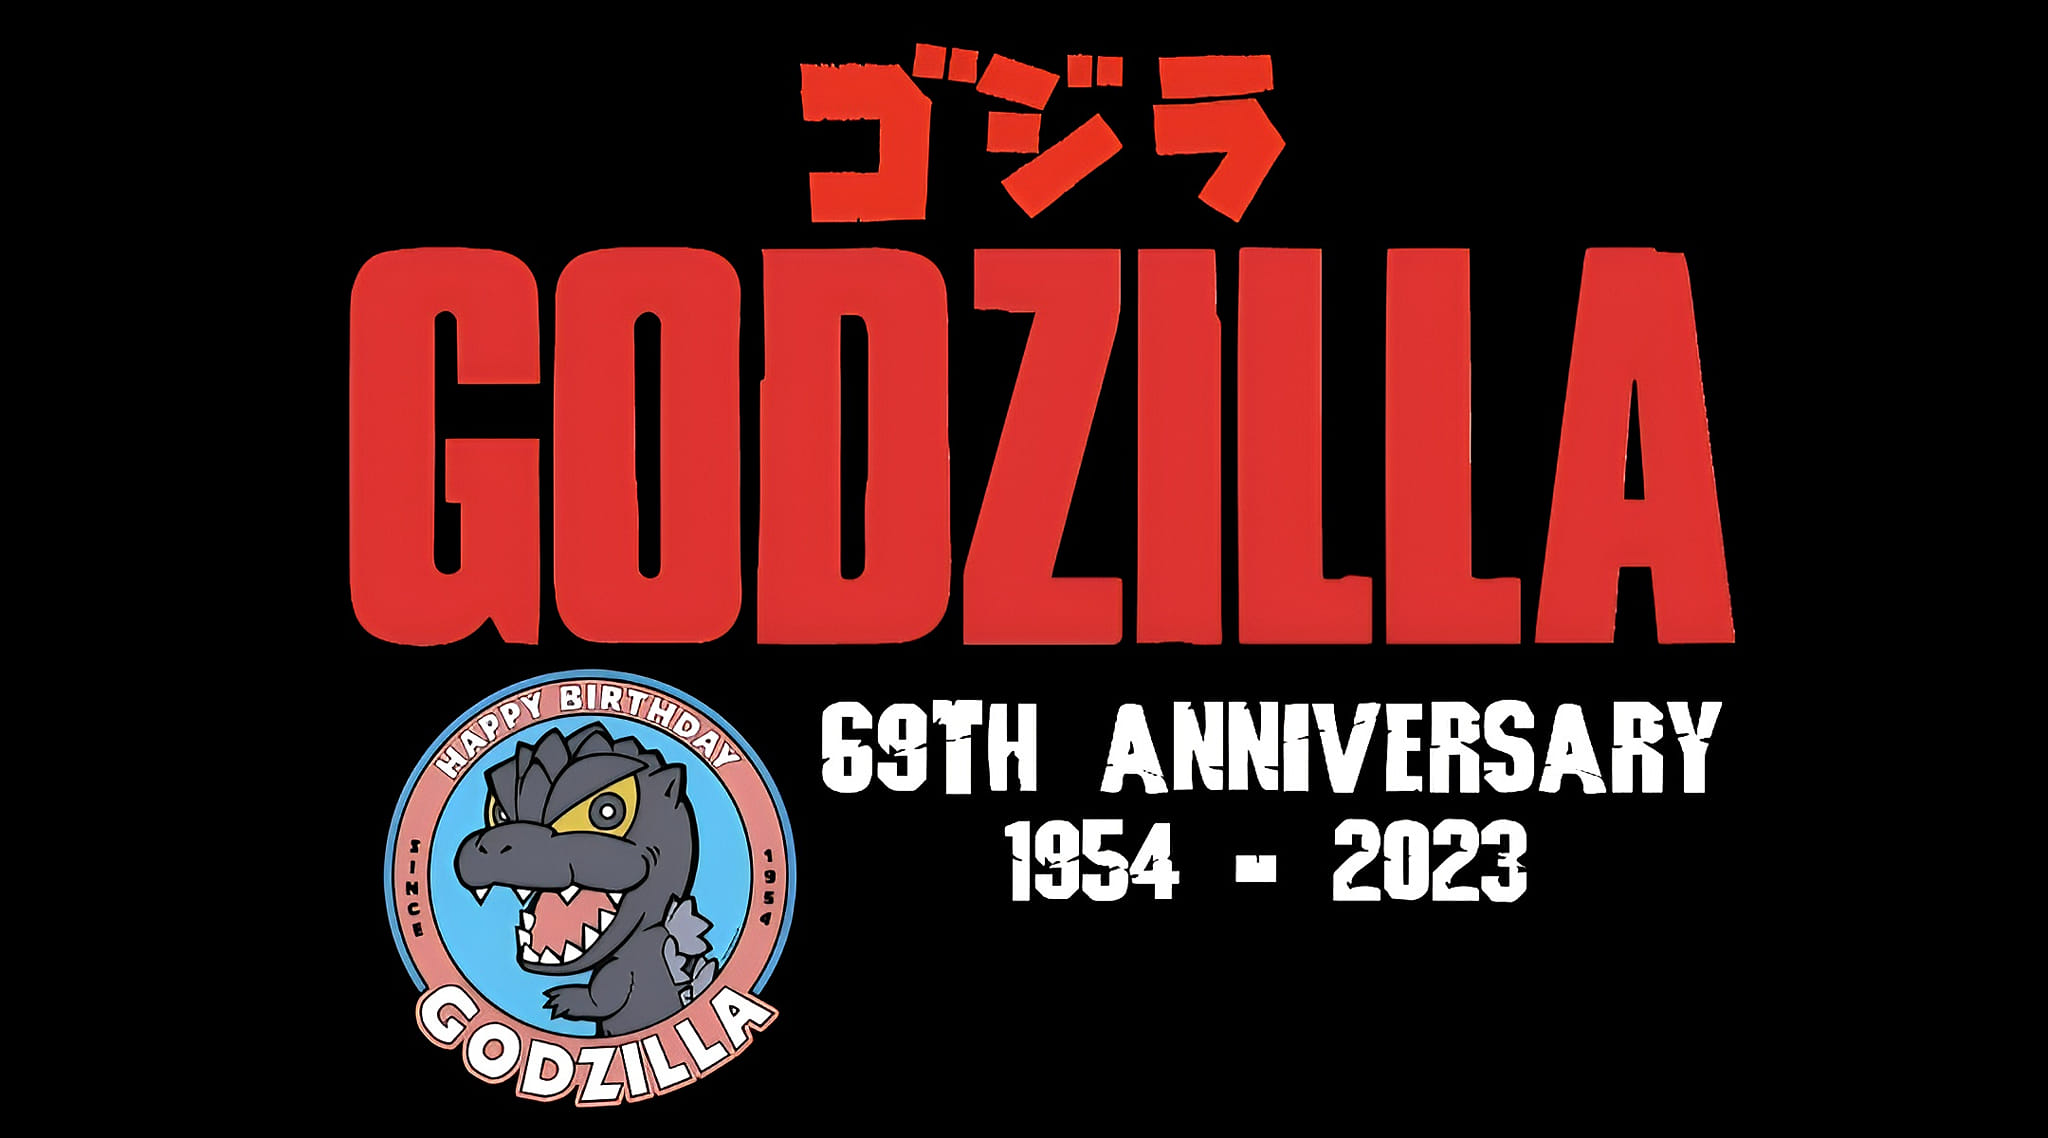 GODZILLA FEST 2023: What You Missed in the Livestream